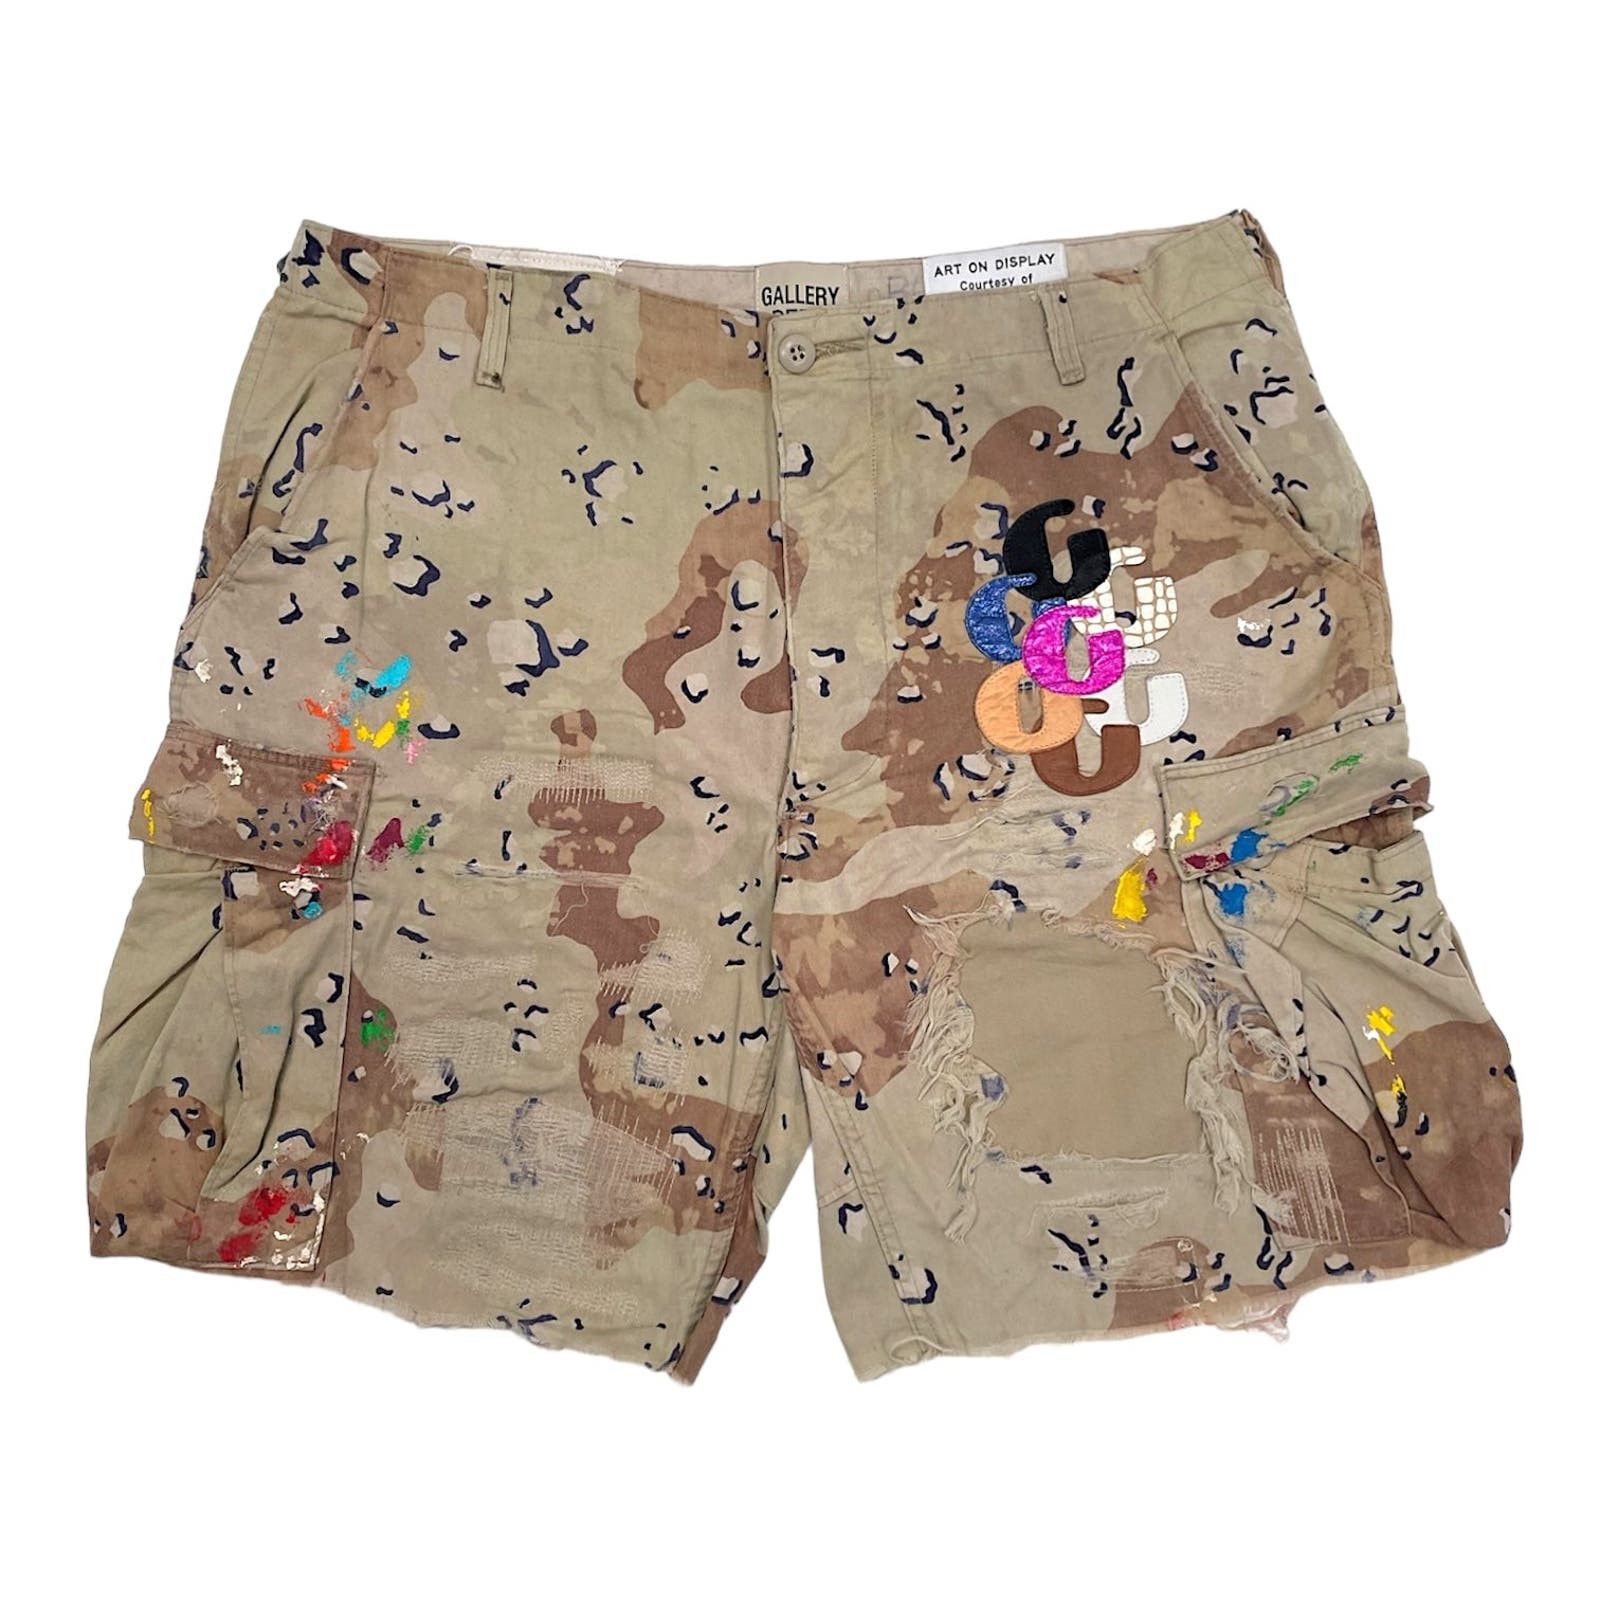 Gallery Dept. Gallery Department Cargo Shorts Chocolate Chip Camo | Grailed